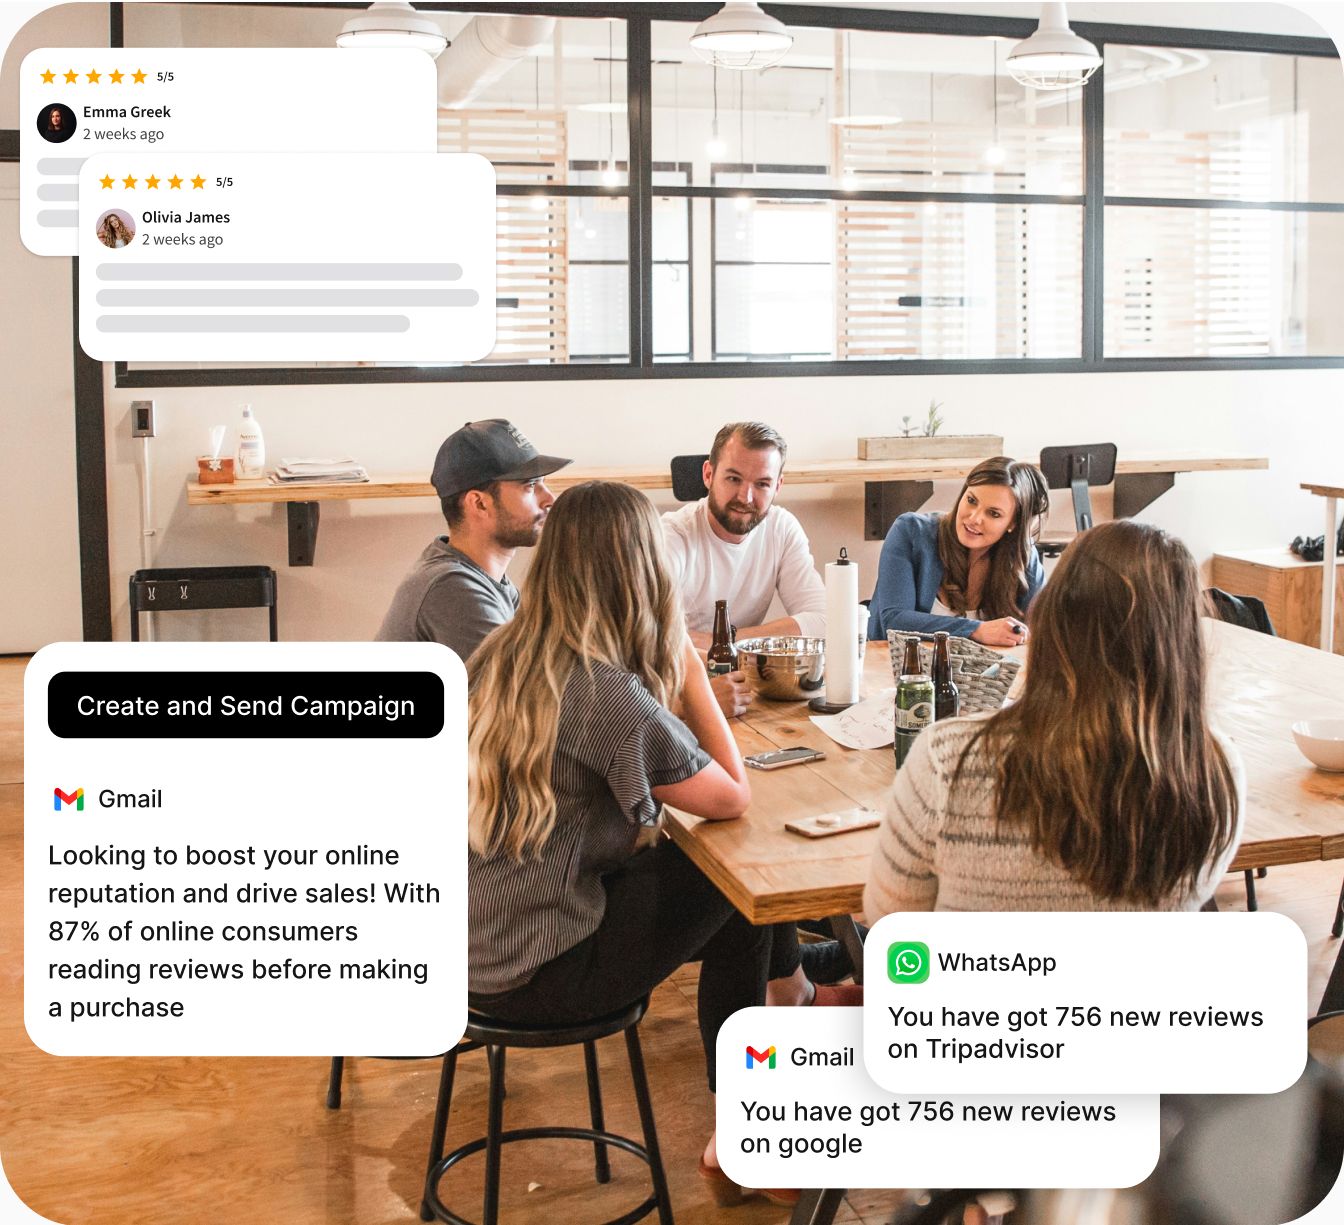 Marketing dashboard showcasing positive customer reviews and notifications for a new campaign, with recent review alerts from Gmail and WhatsApp.